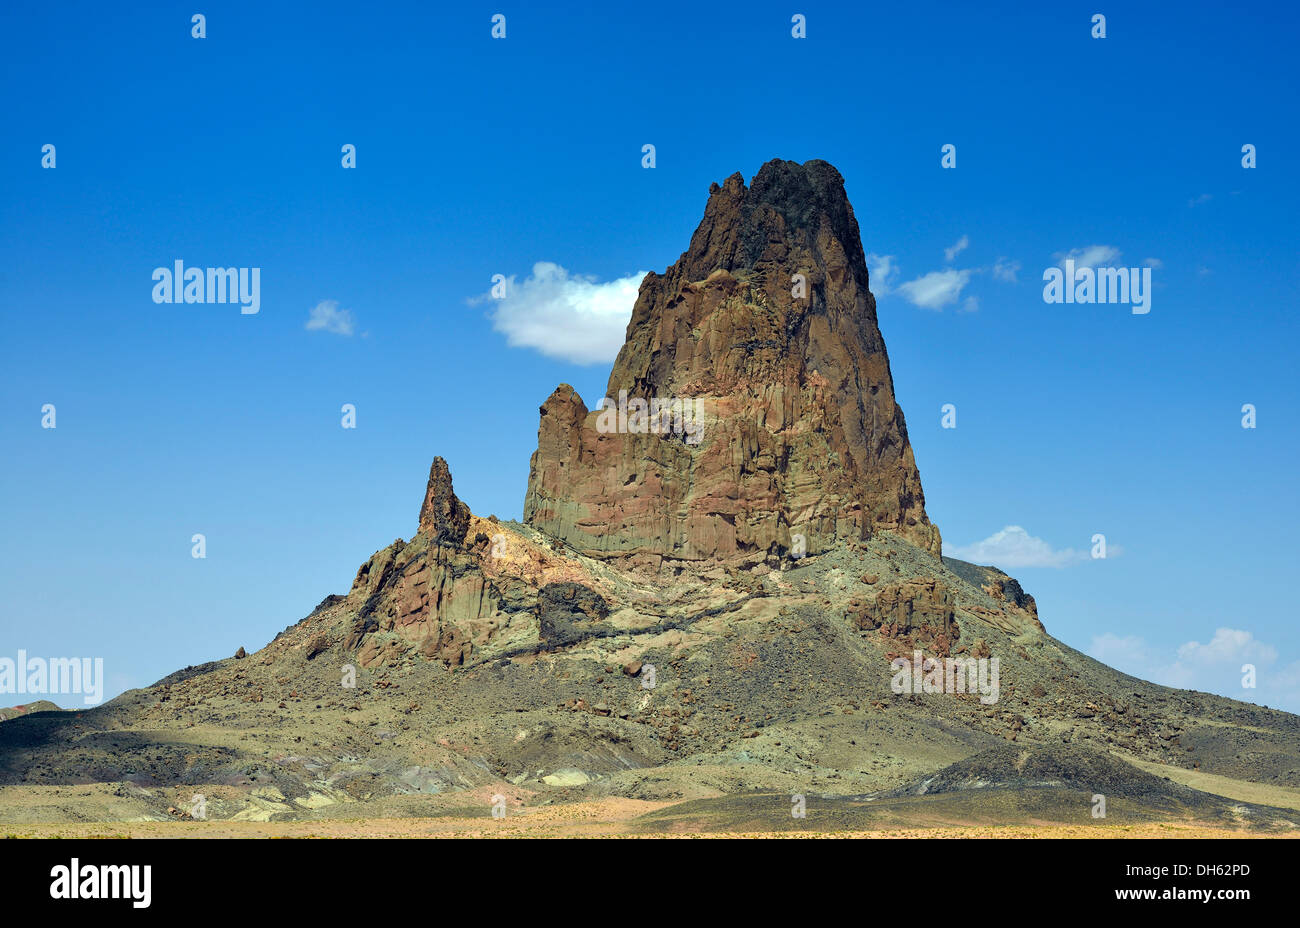 Shiprock Monolith, sacred mountain of the Navajo Indians, en route to Monument Valley, Navajo Tribal Park Stock Photo